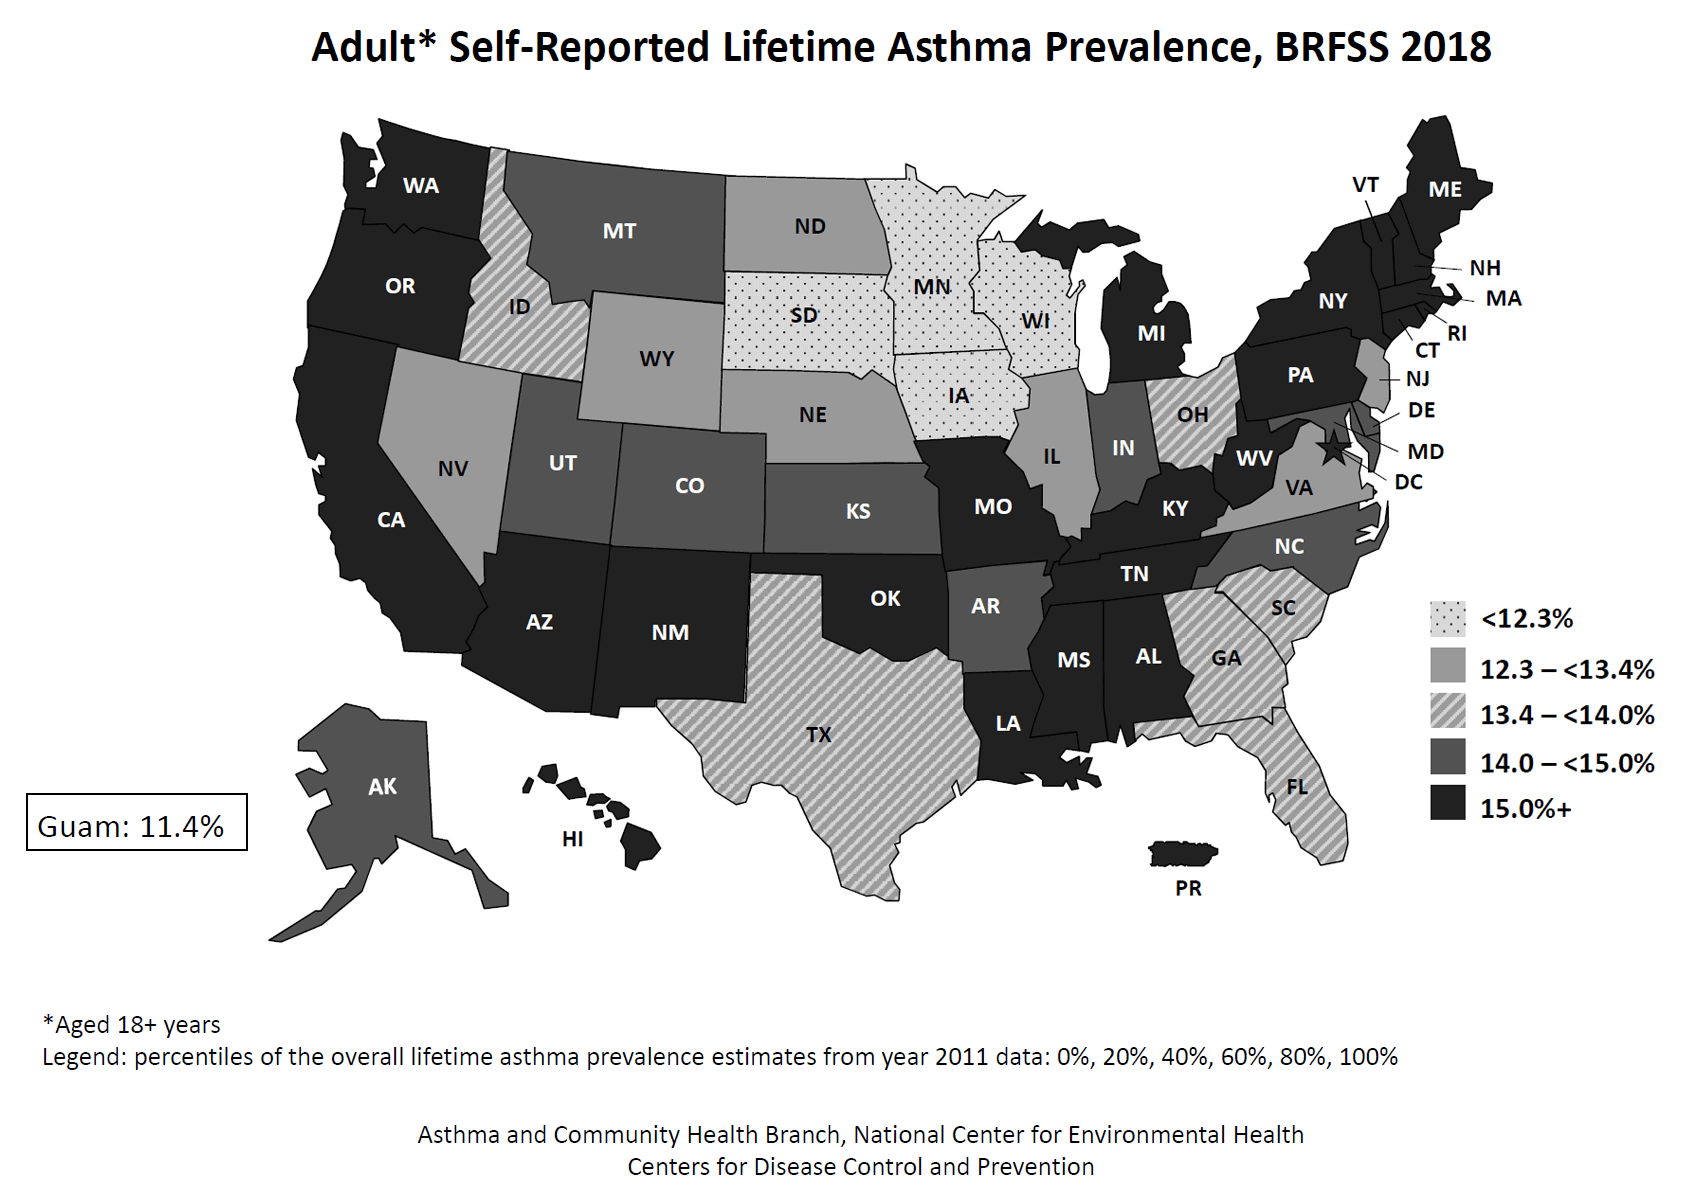 Black and white U.S. map showing adult self-reported lifetime asthma prevalence by state for BRFSS 2018